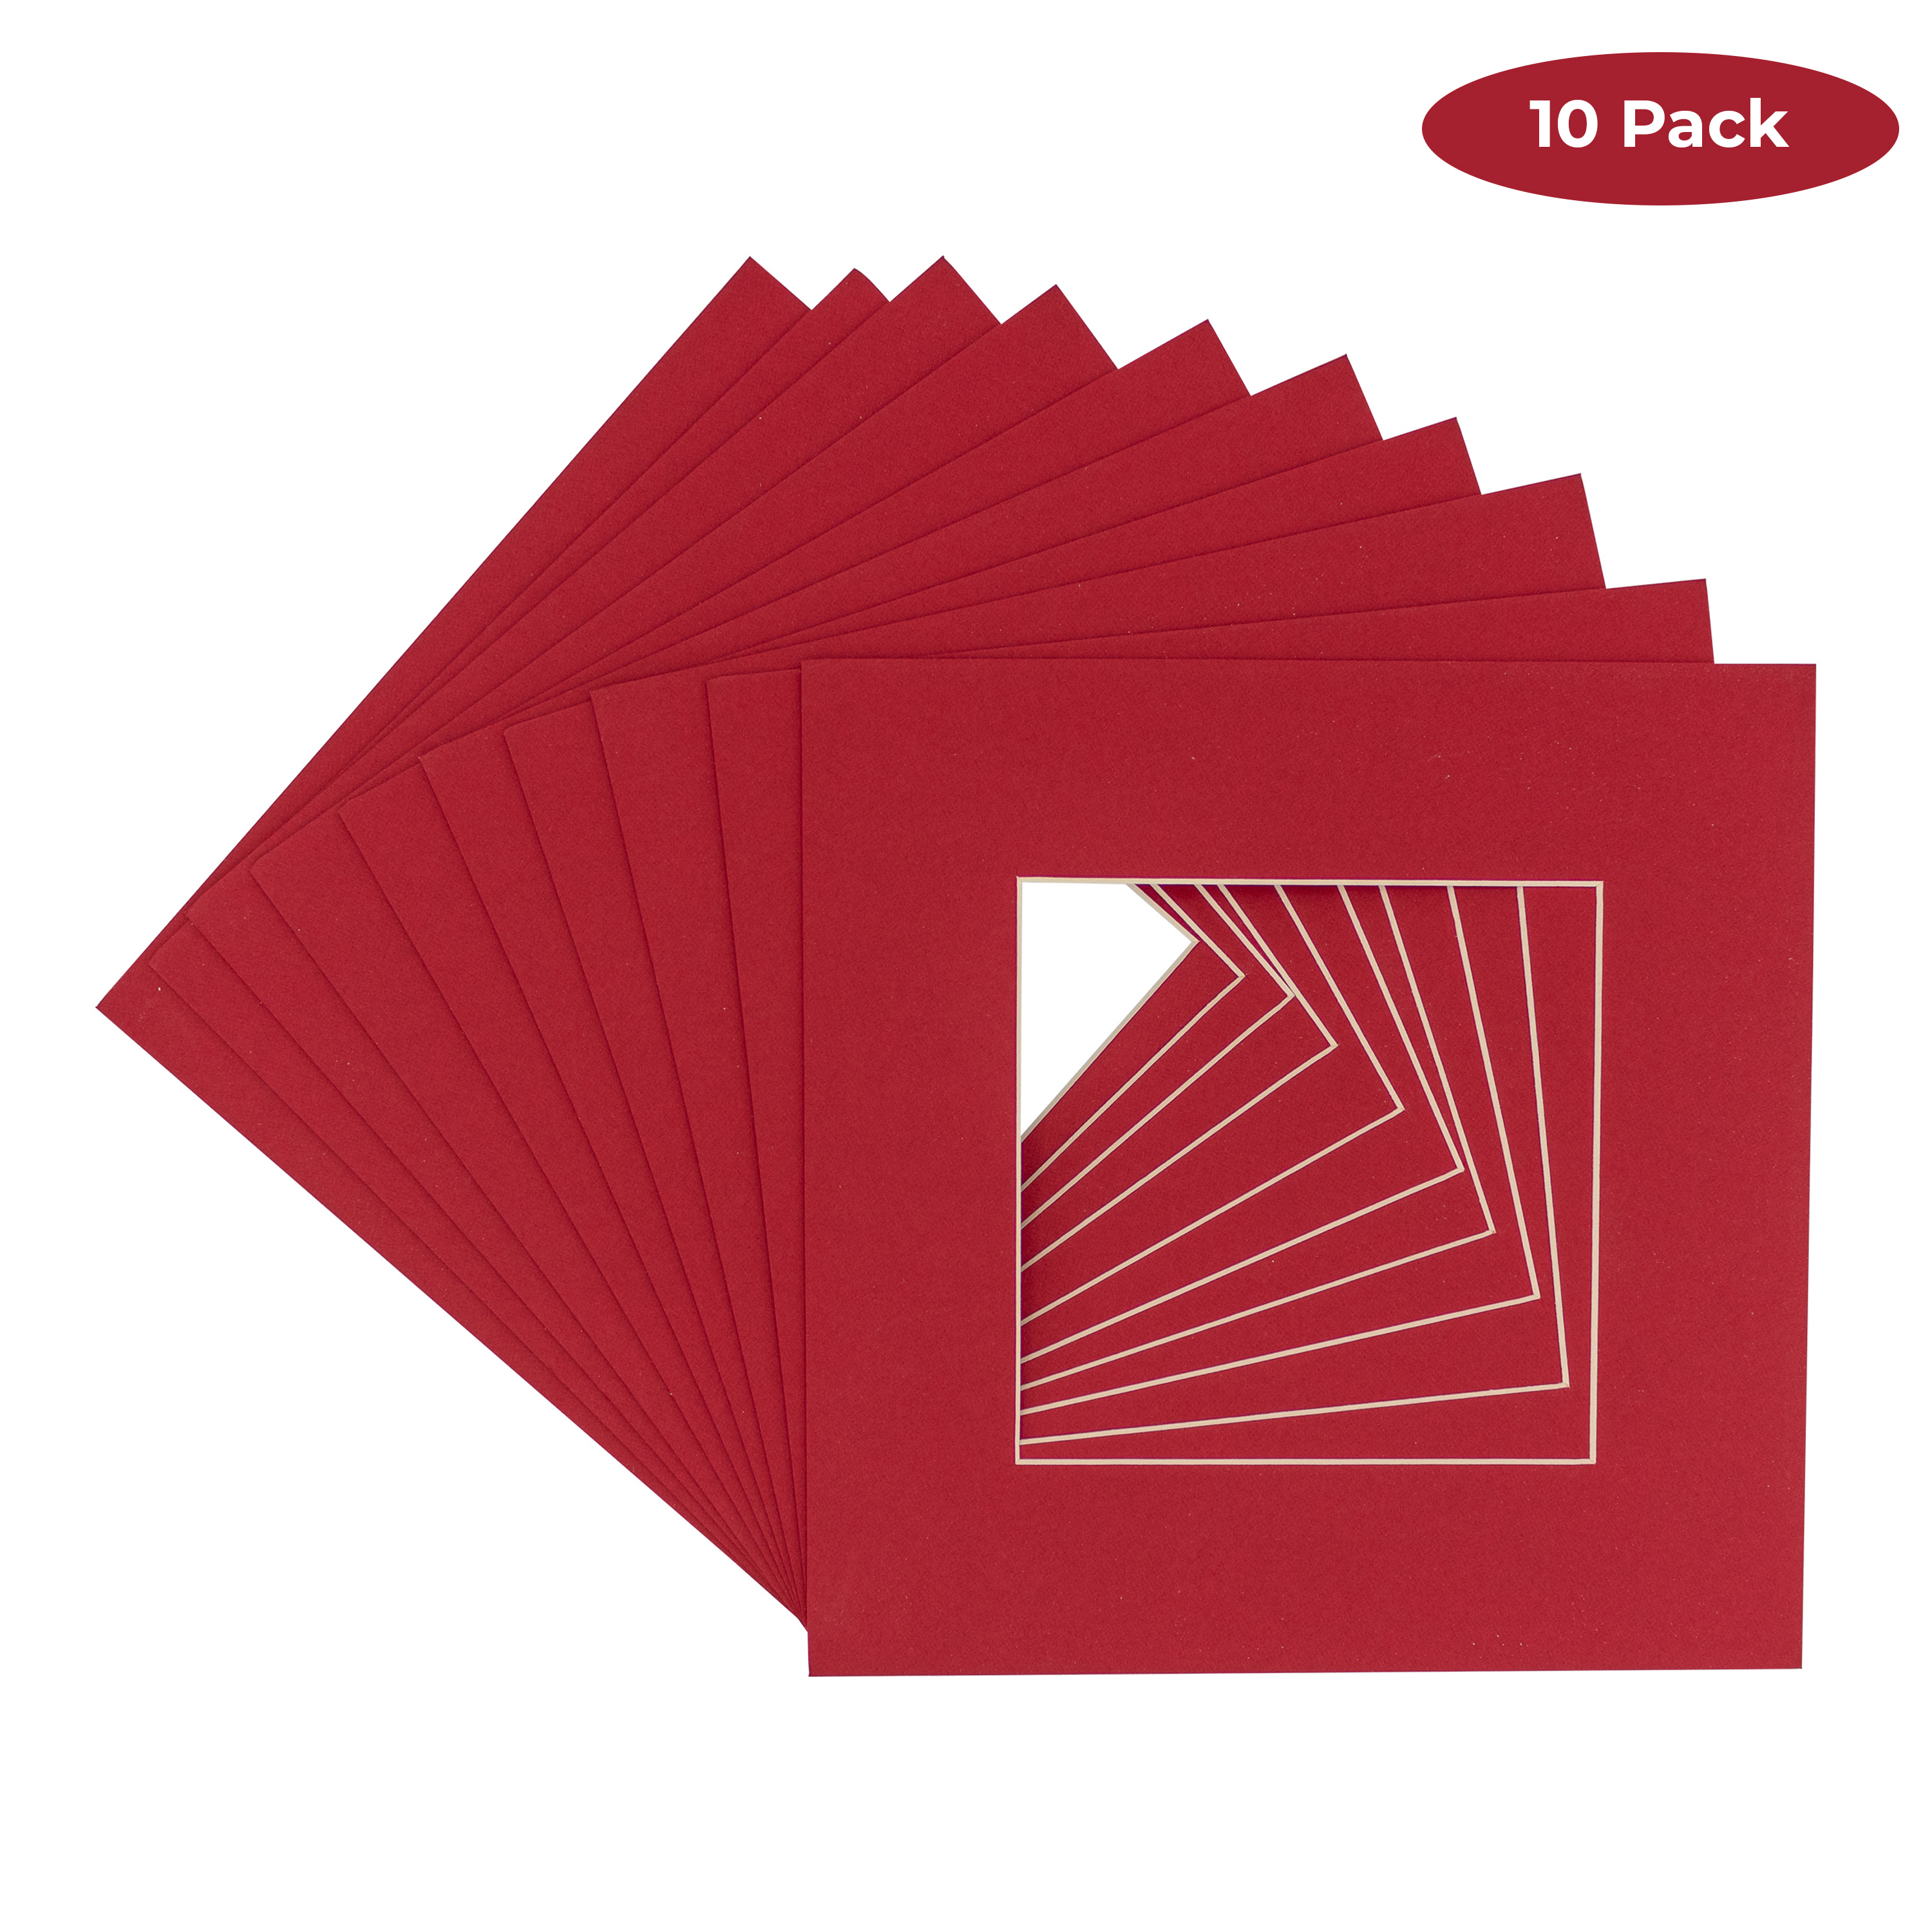 CustomPictureFrames.com Deep Red Acid Free 20x20 Picture Frame Mats with White Core Bevel Cut for 10x10 Pictures - Fits 20x20 Frame - Pack of 10 Mats